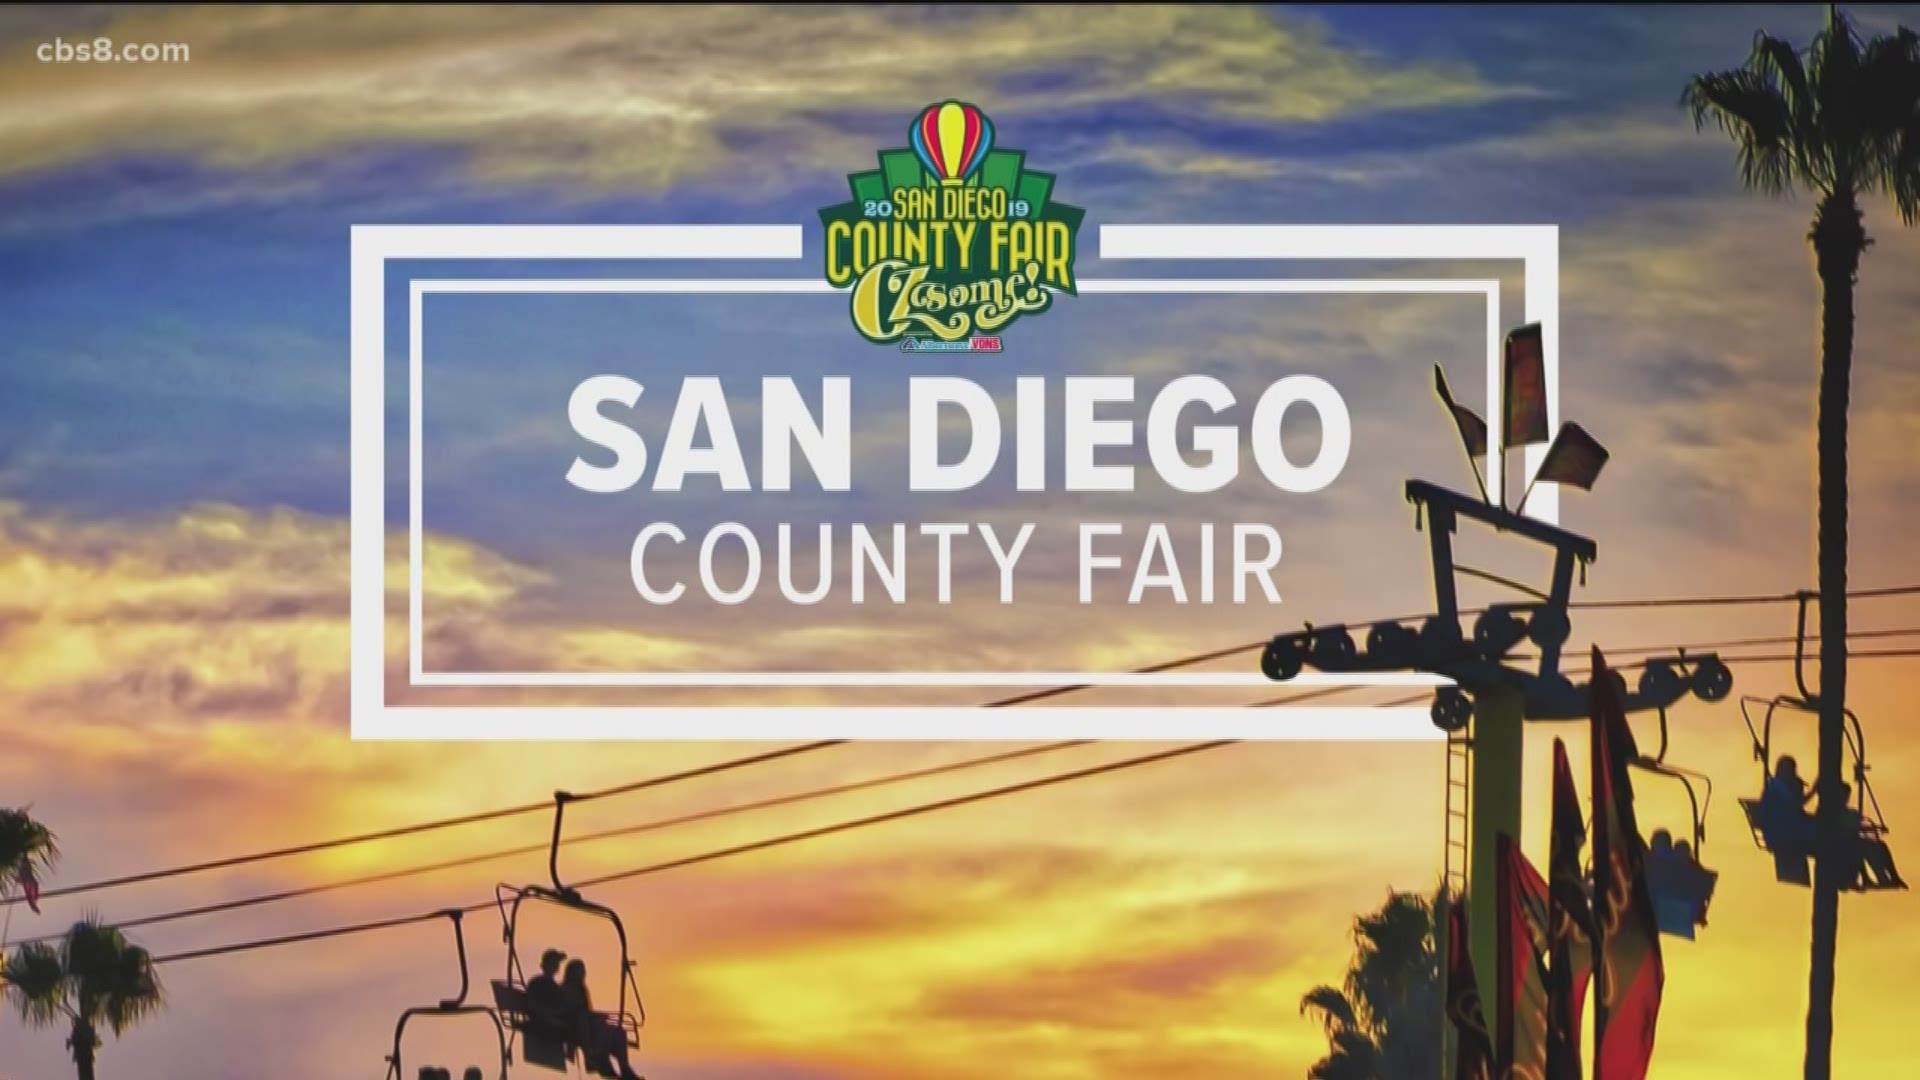 The summer vibe in San Diego is in full swing with the kick off of the San Diego County Fair. News 8's Monique Griego has all the latest food and fun we can expect at this year's OZ themed fair.